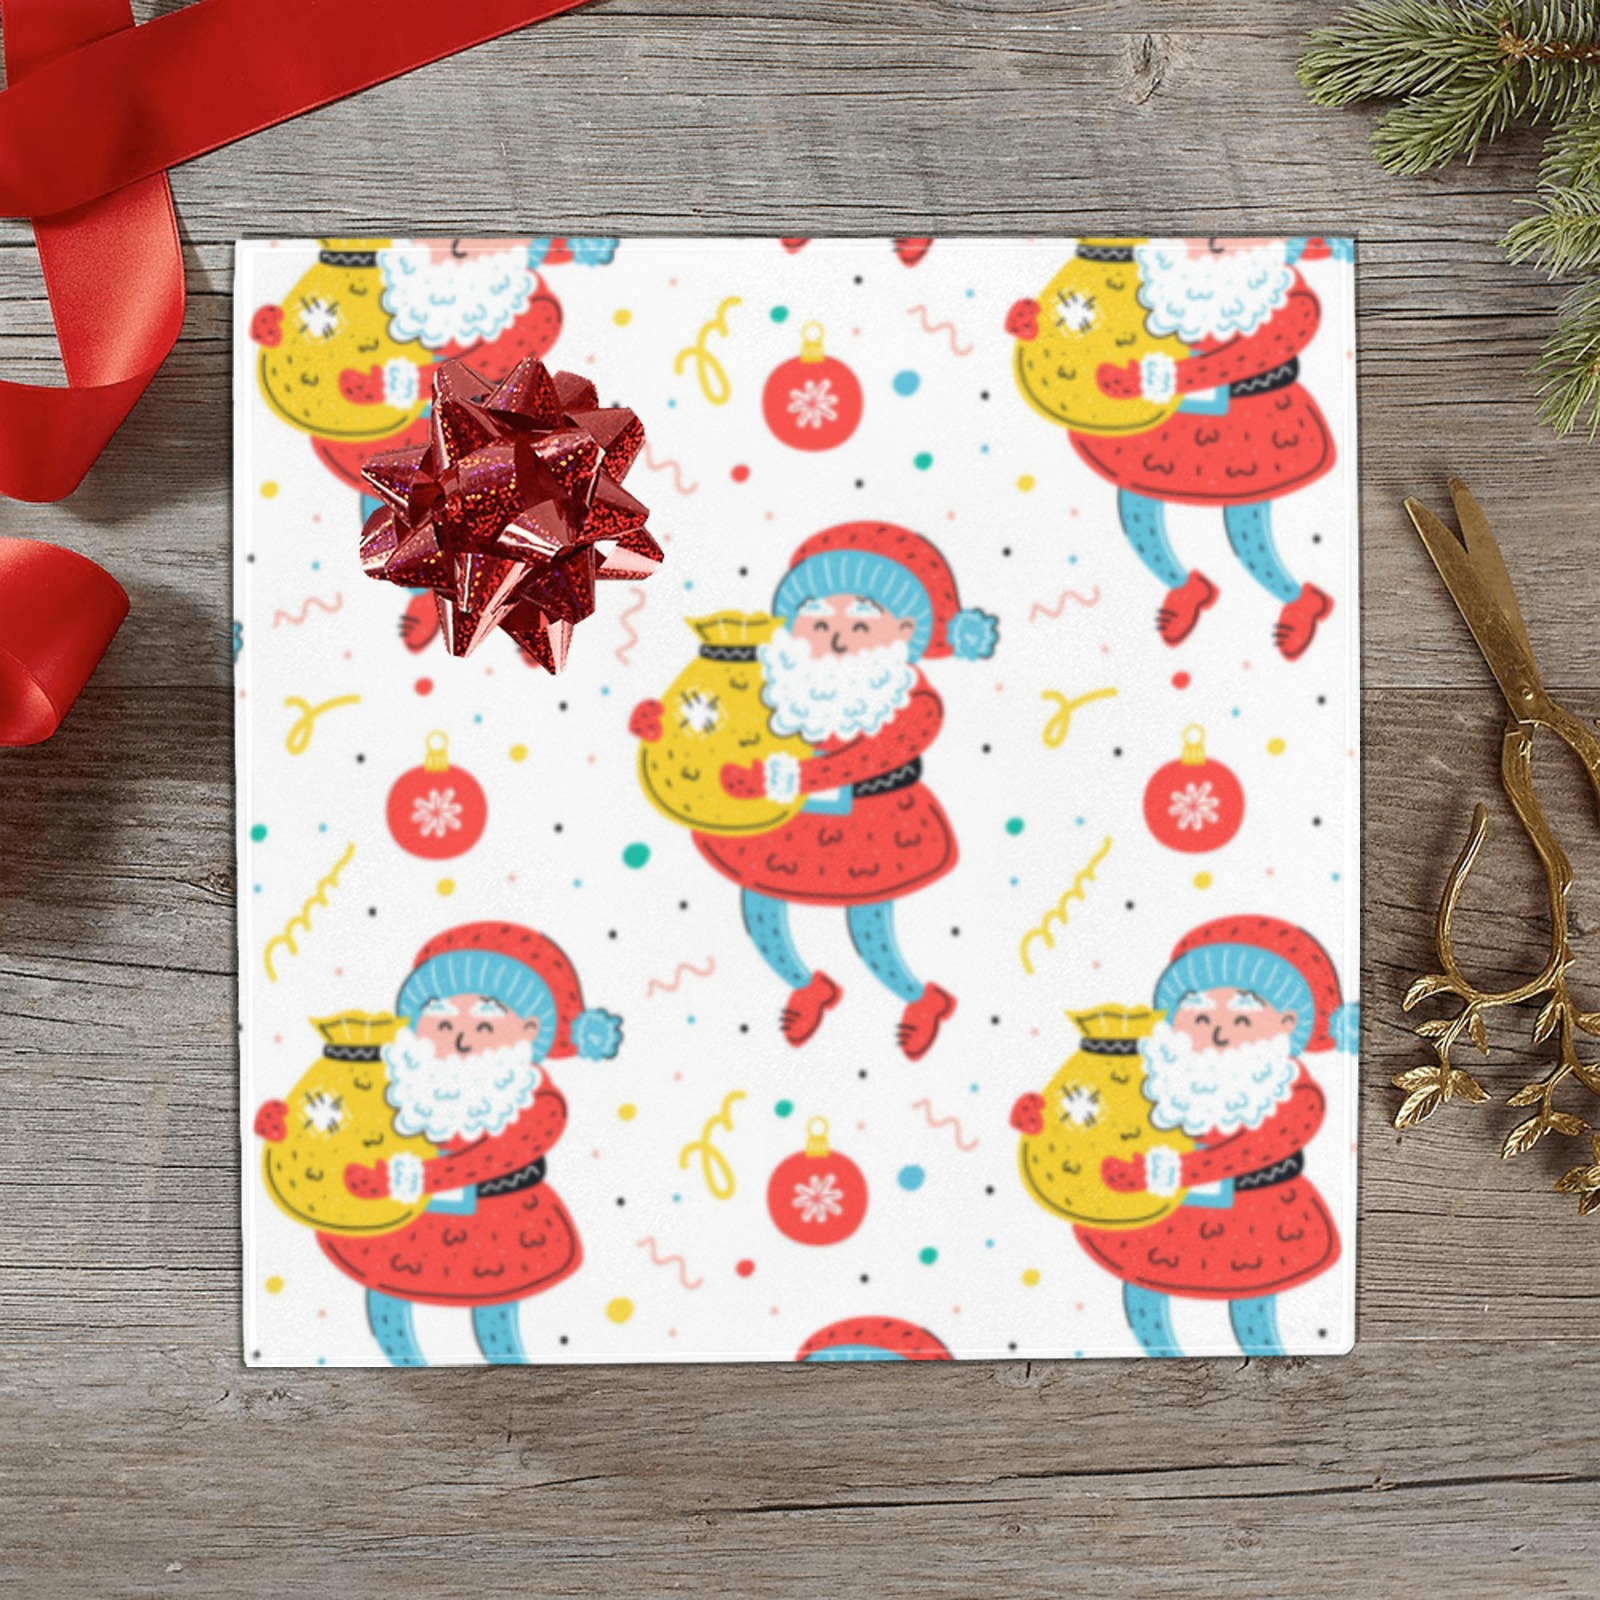 Vintage Santa Claus Christmas Pattern Gift Wrapping Paper 58"x 23" (1 Roll)